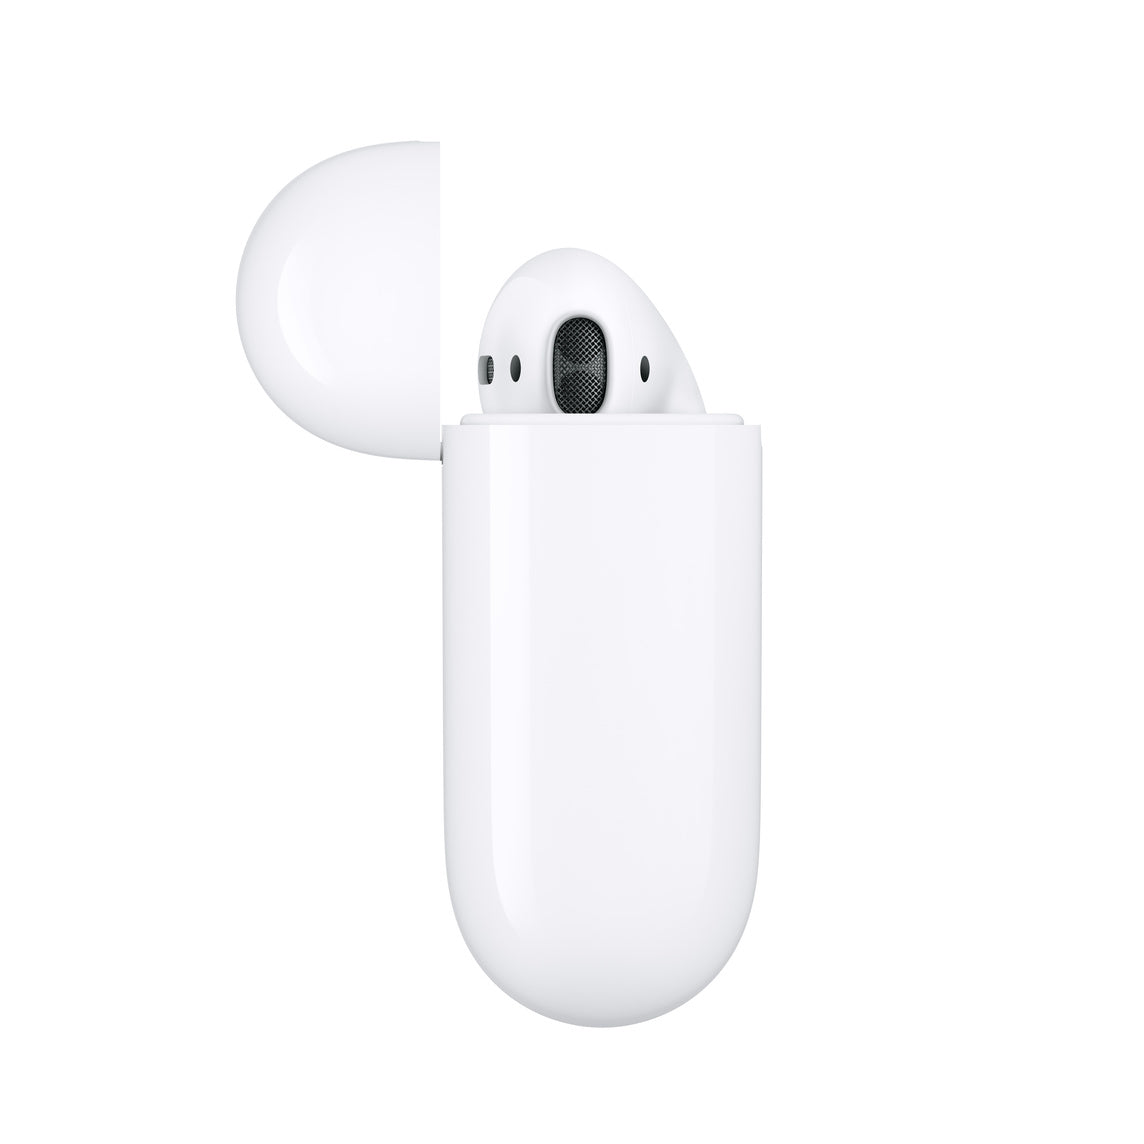 Apple AirPods 2nd Generation with Wired Charging Case - Refurbished Good